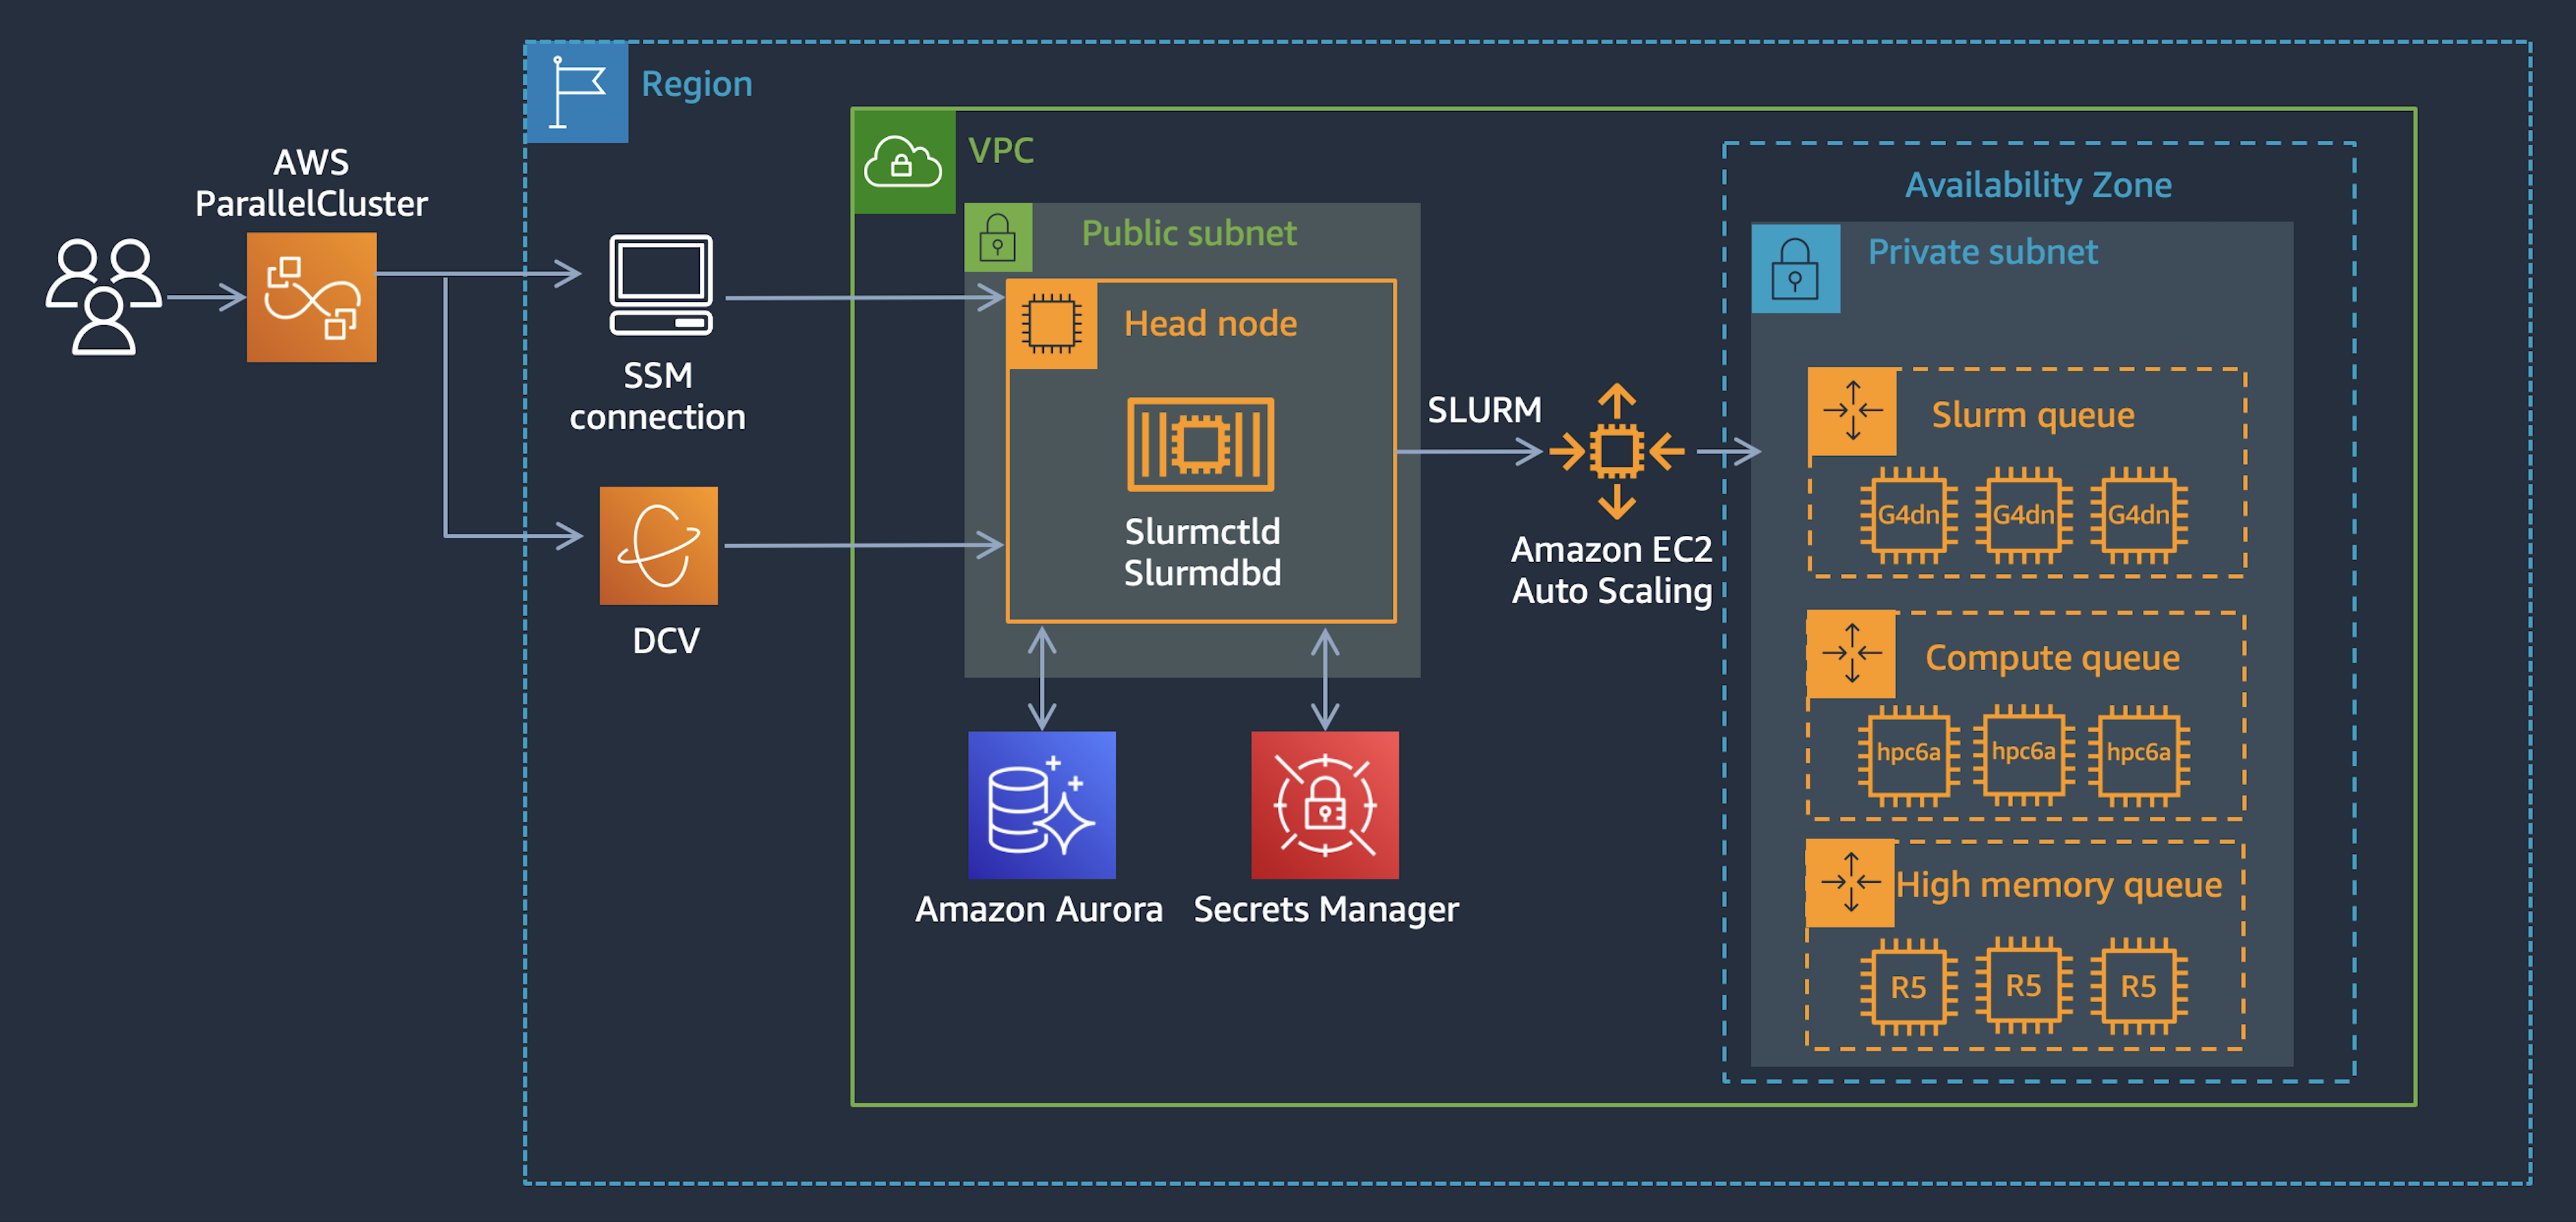 Migrating Slurm EDA Workloads to AWS With AWS ParallelCluster